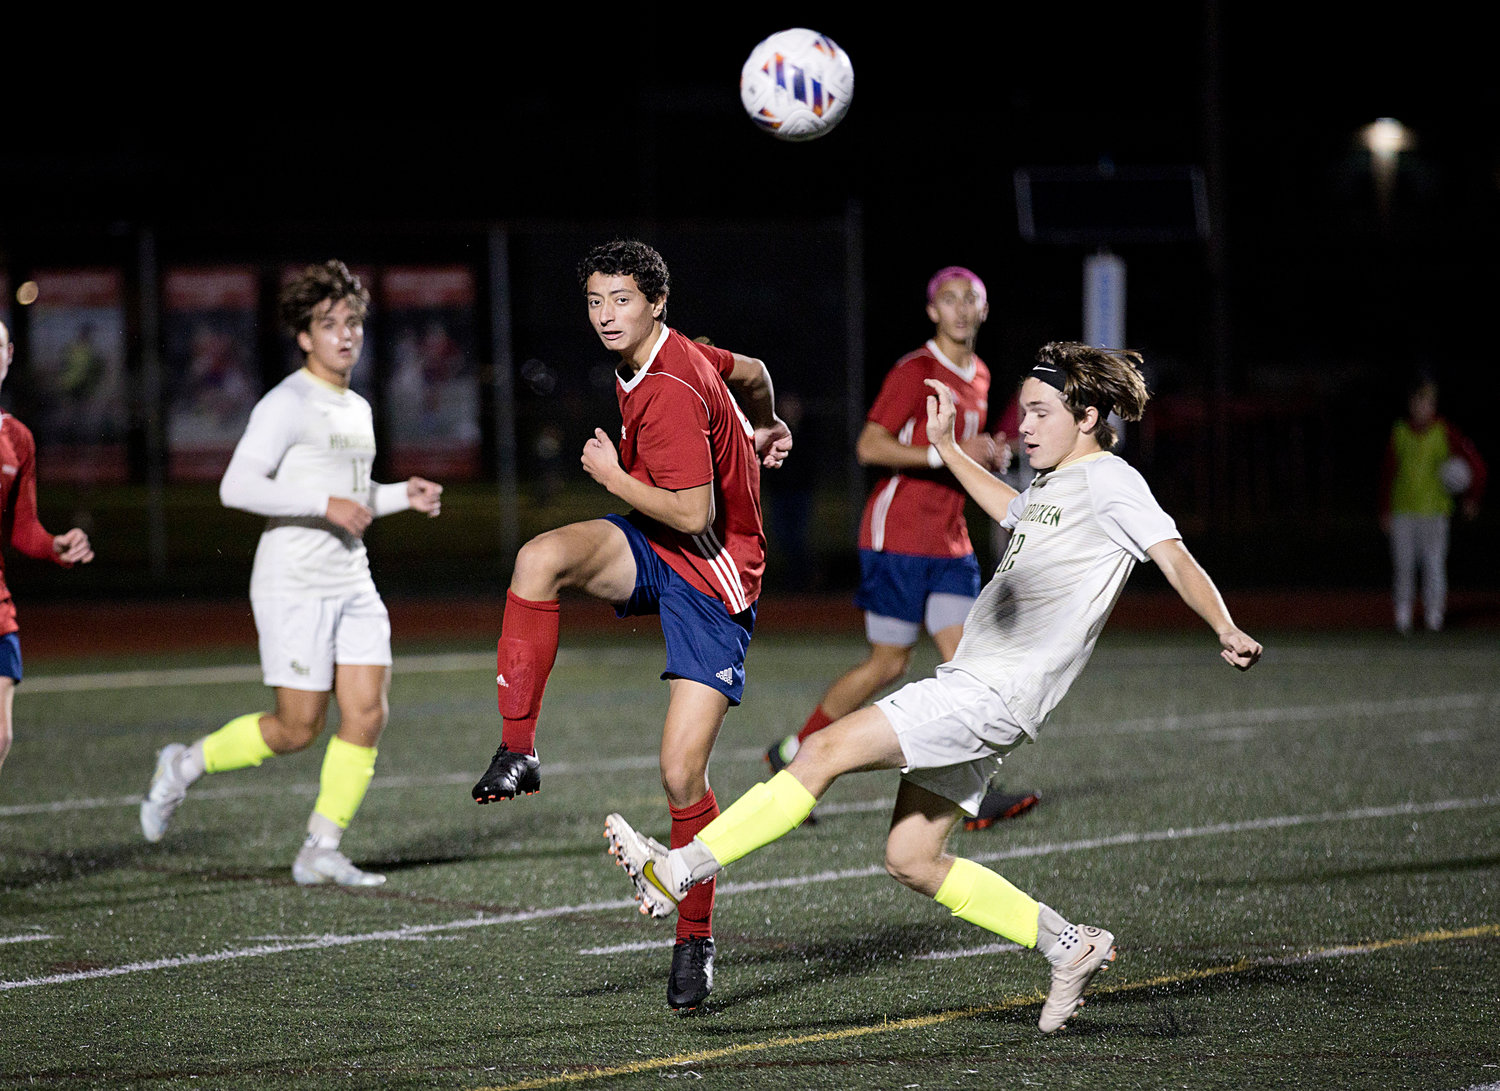 Ferenc Karoly boots the ball past a Hendricken opponent.